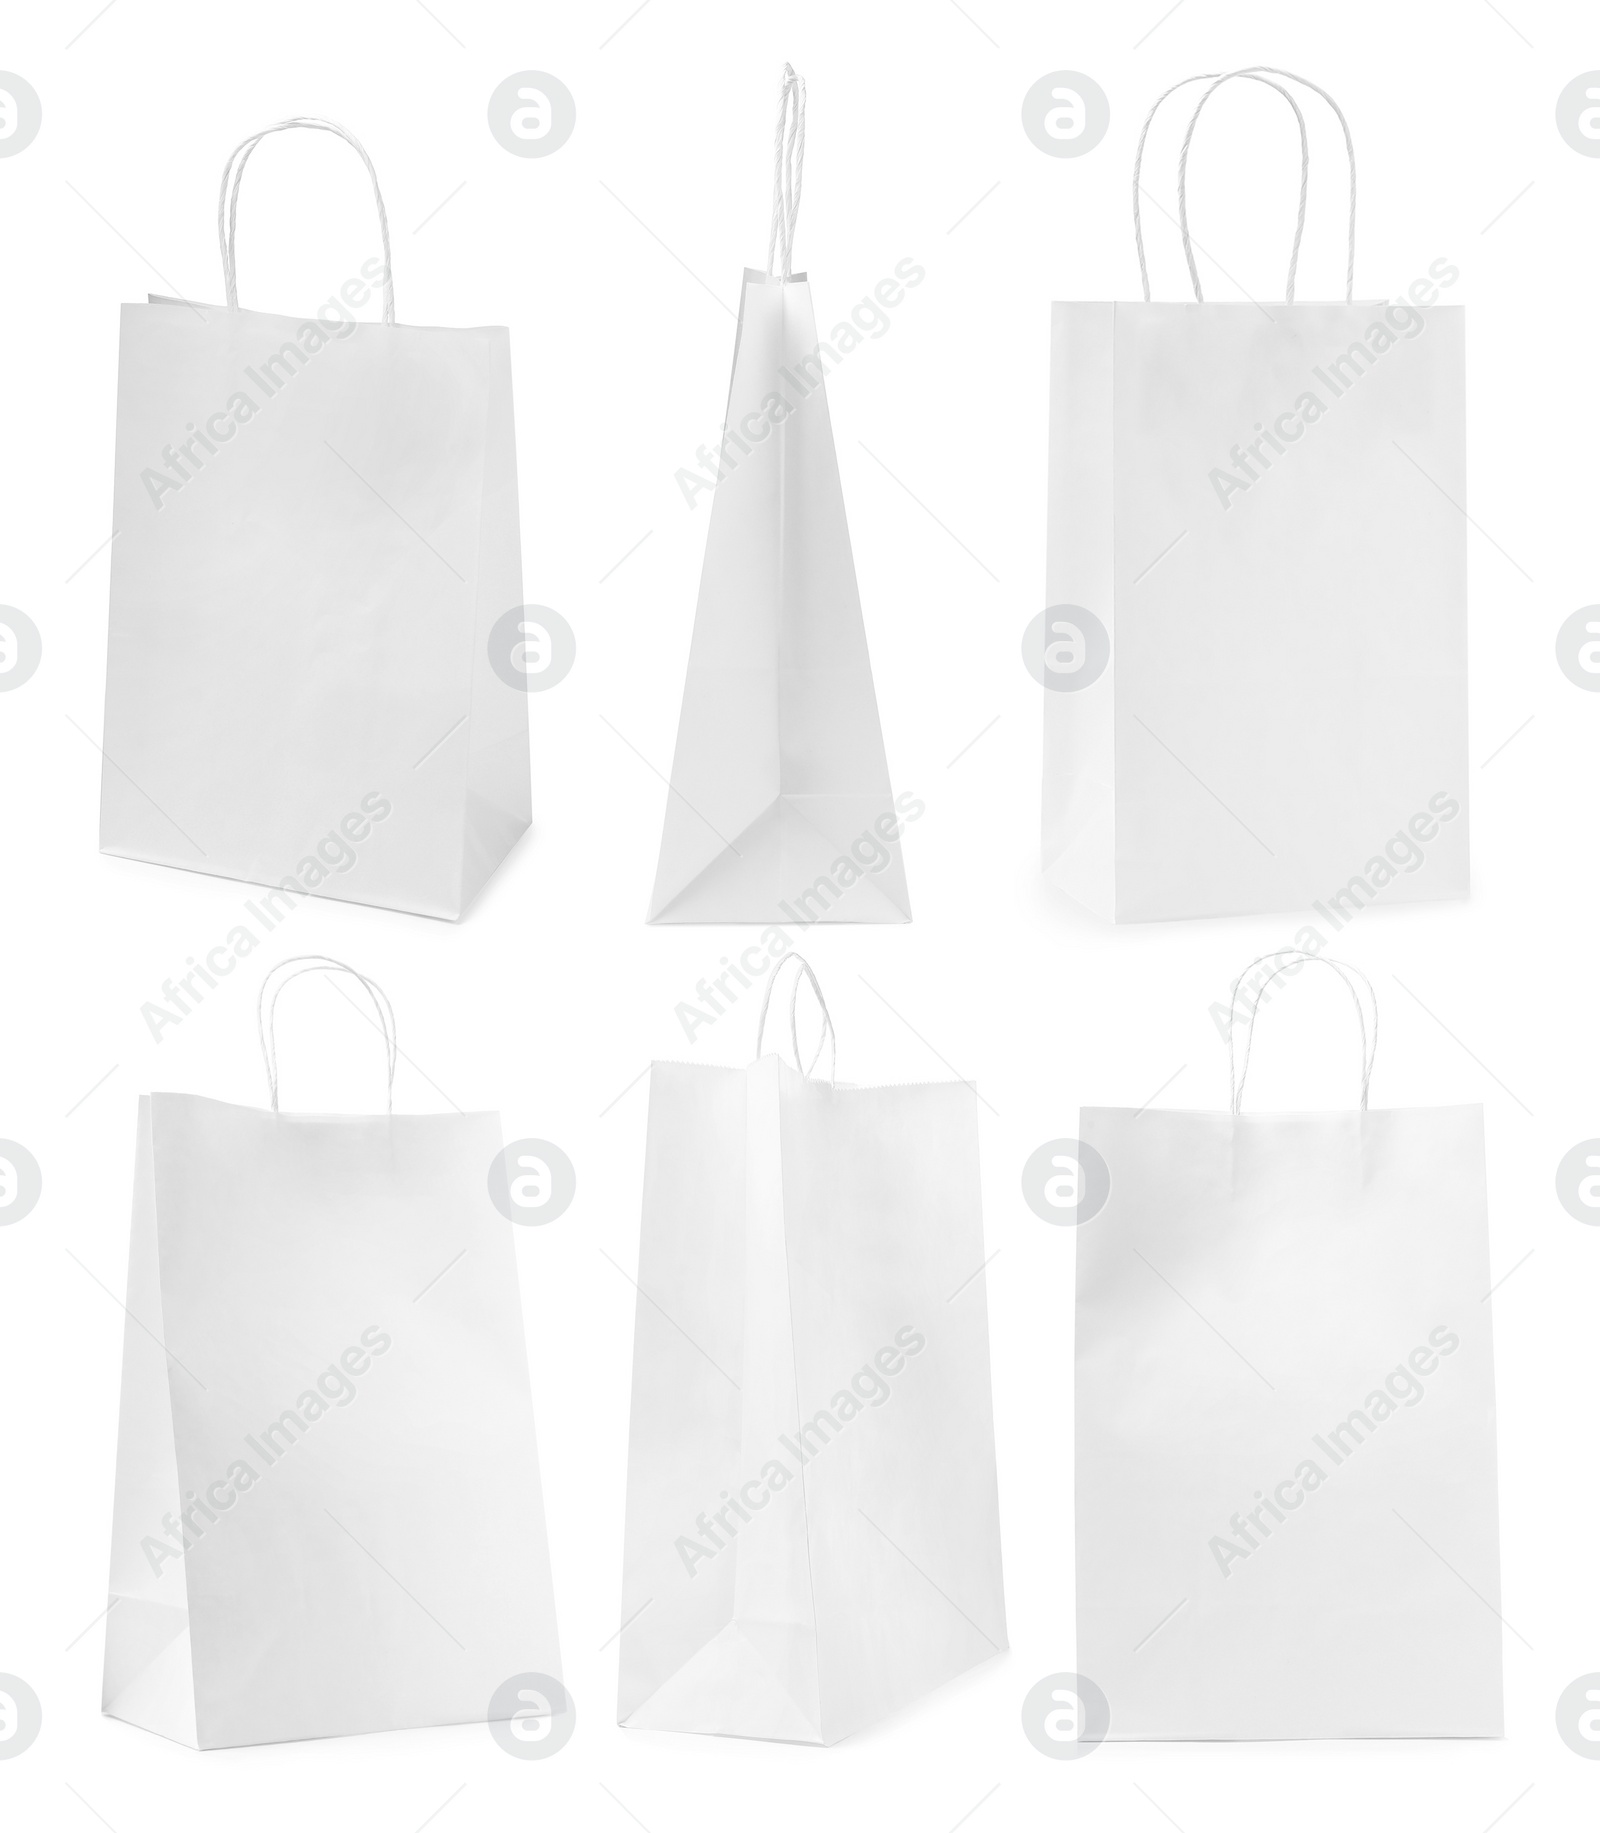 Image of Set with paper bags on white background